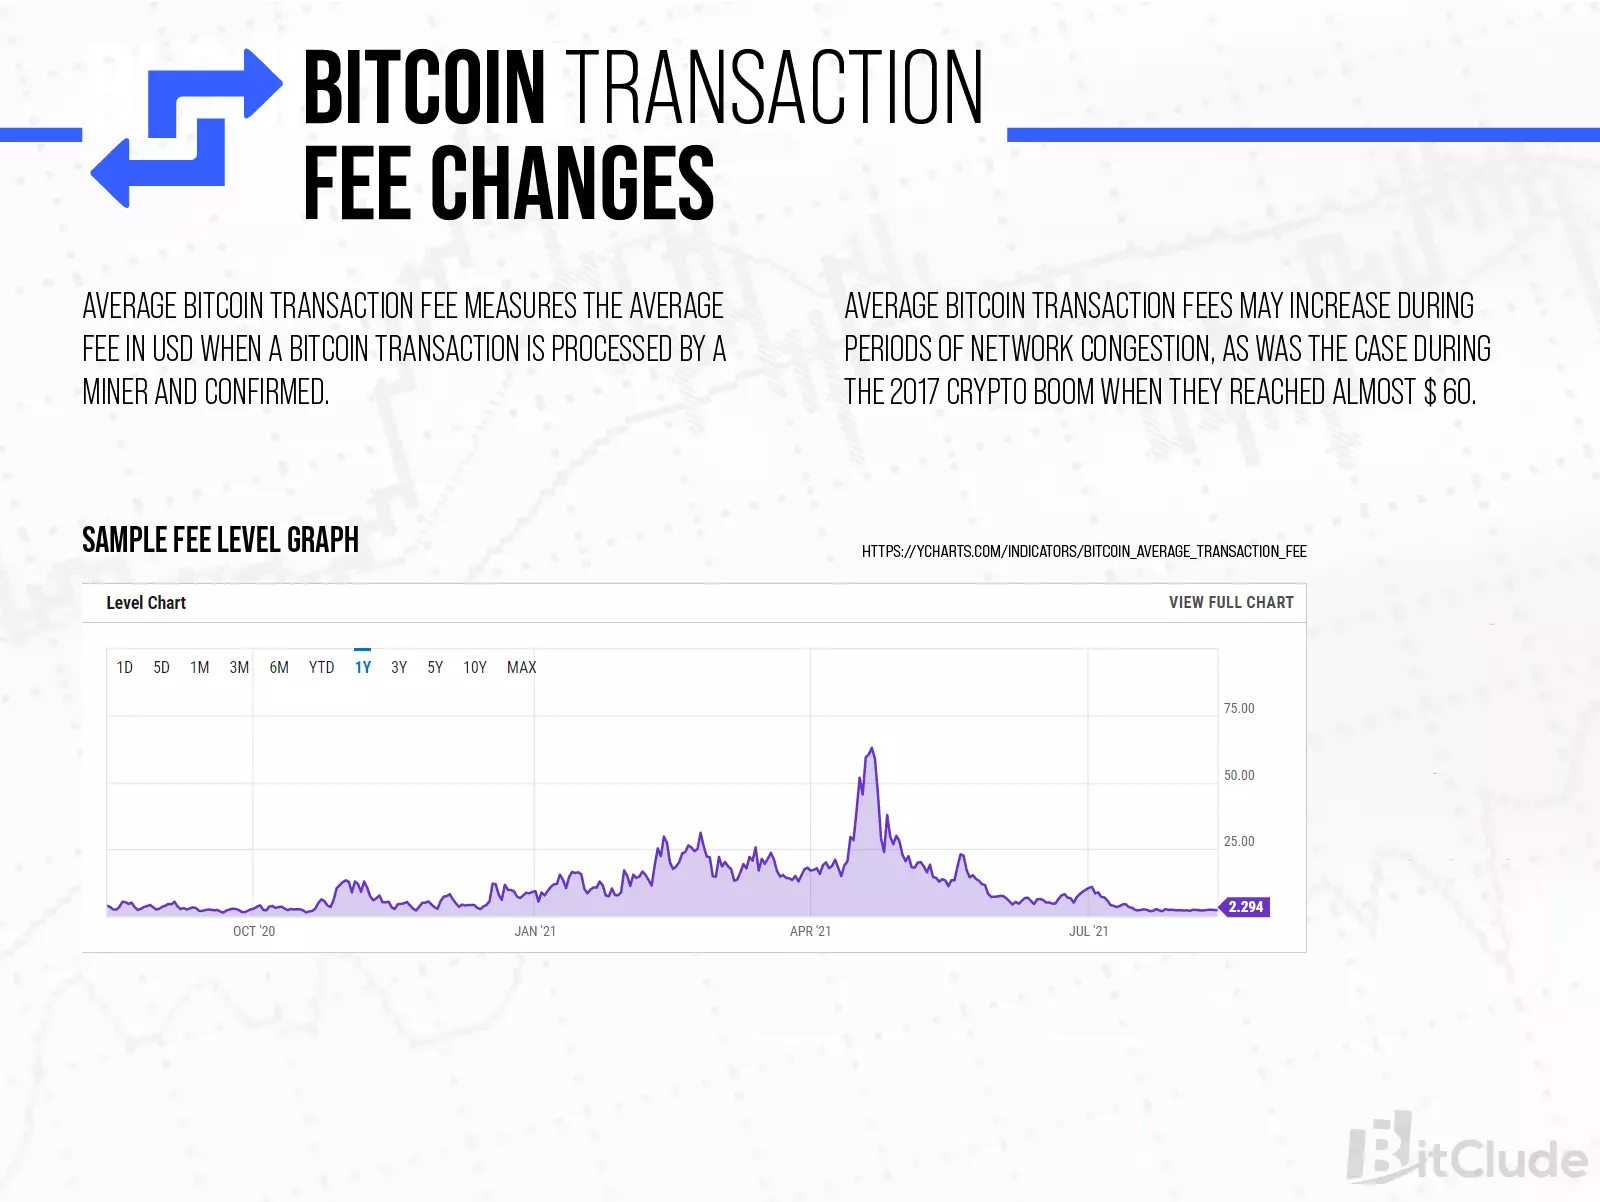 Bitcoin works much better as a store of value than as a means of payment. The graphic shows the price for a transfer over a period of one year.